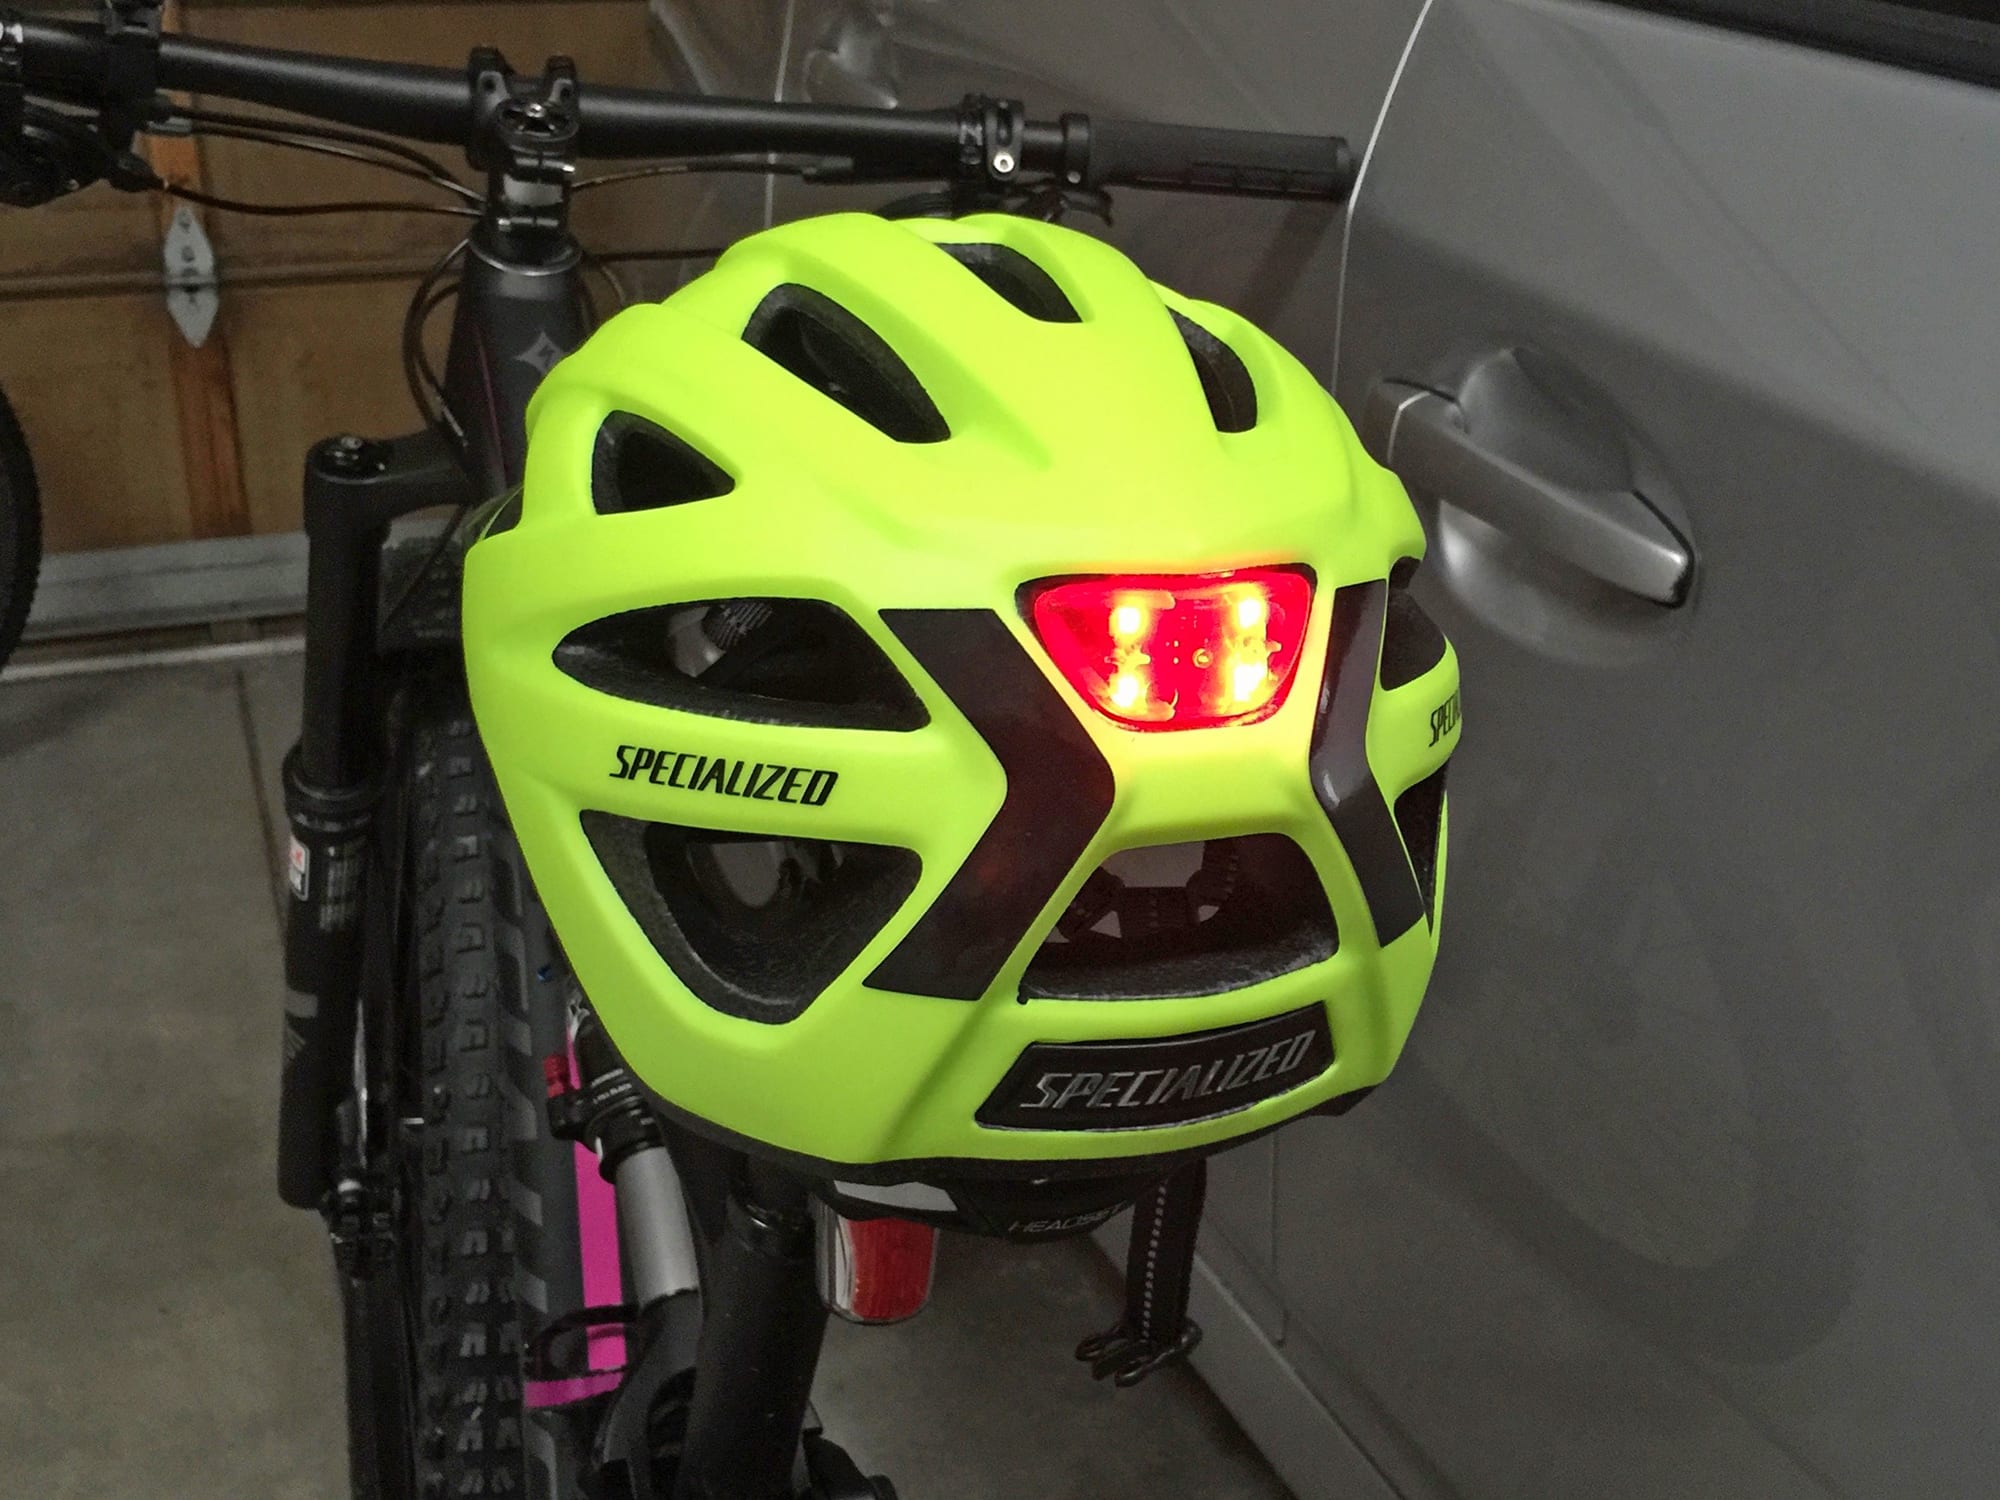 specialized centro winter led